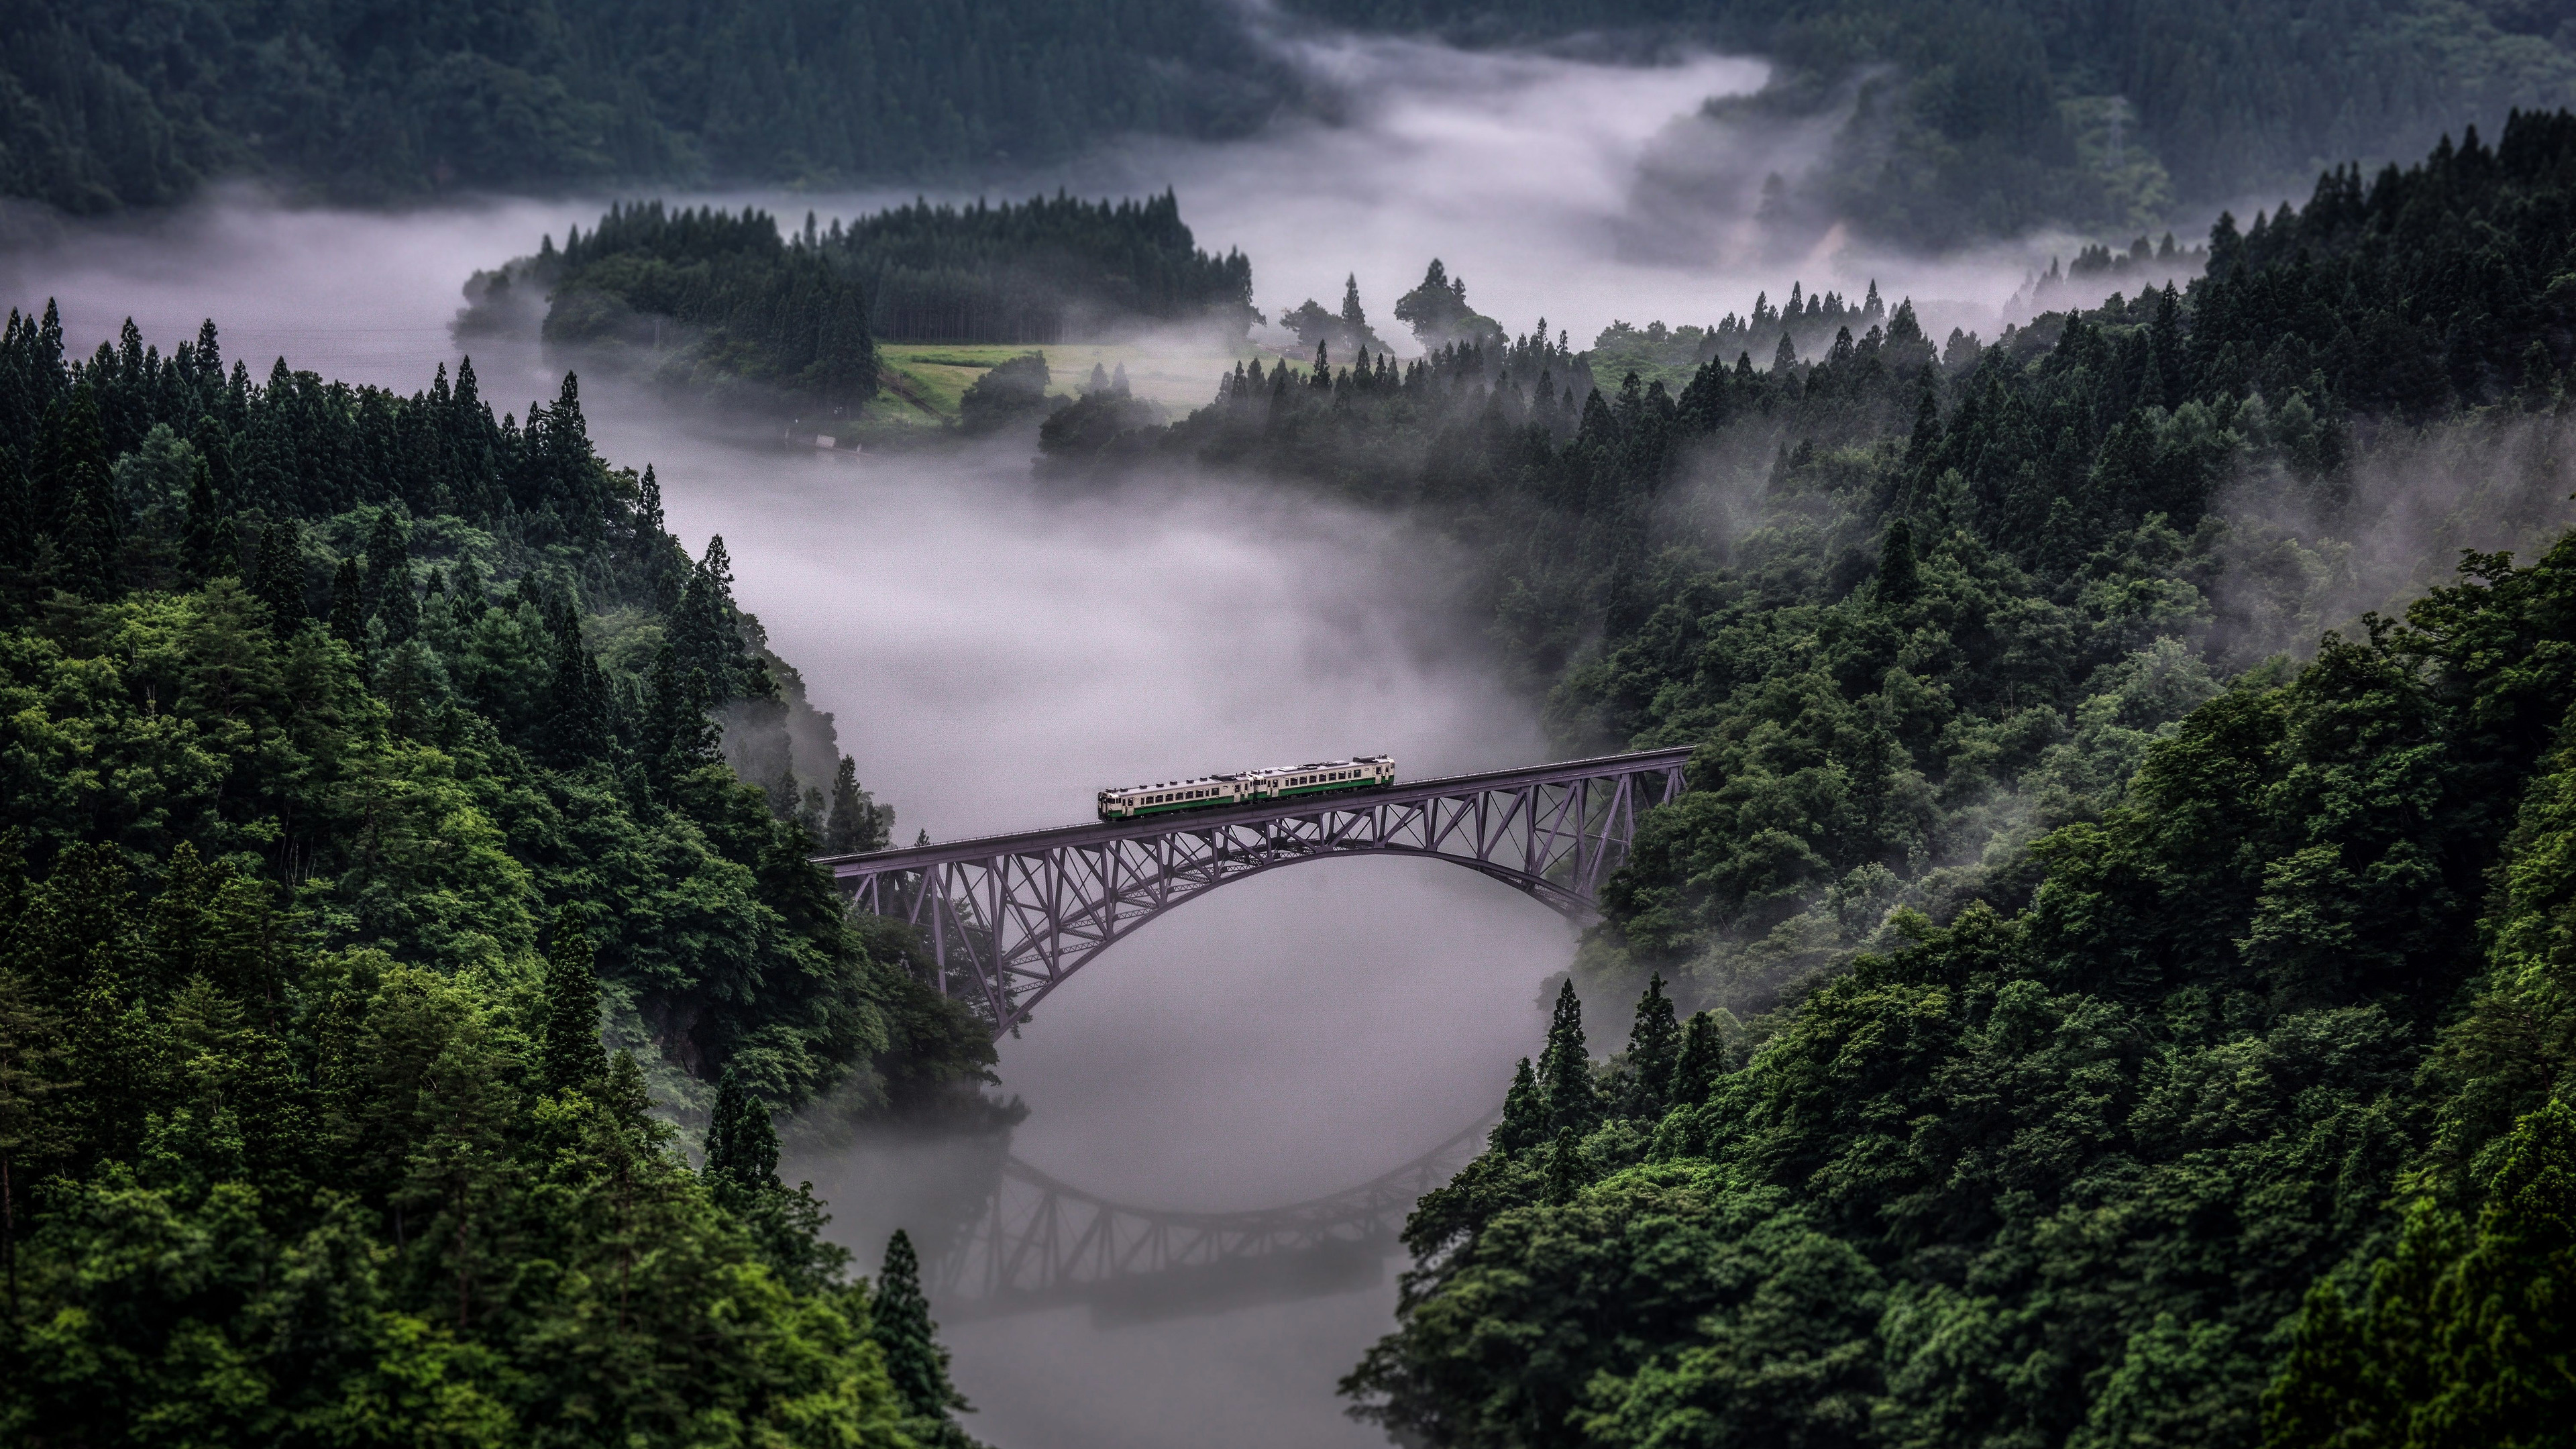 Wallpaper 4k Train Going Over Bridge Surrounded By Trees And River 4k  Wallpaper